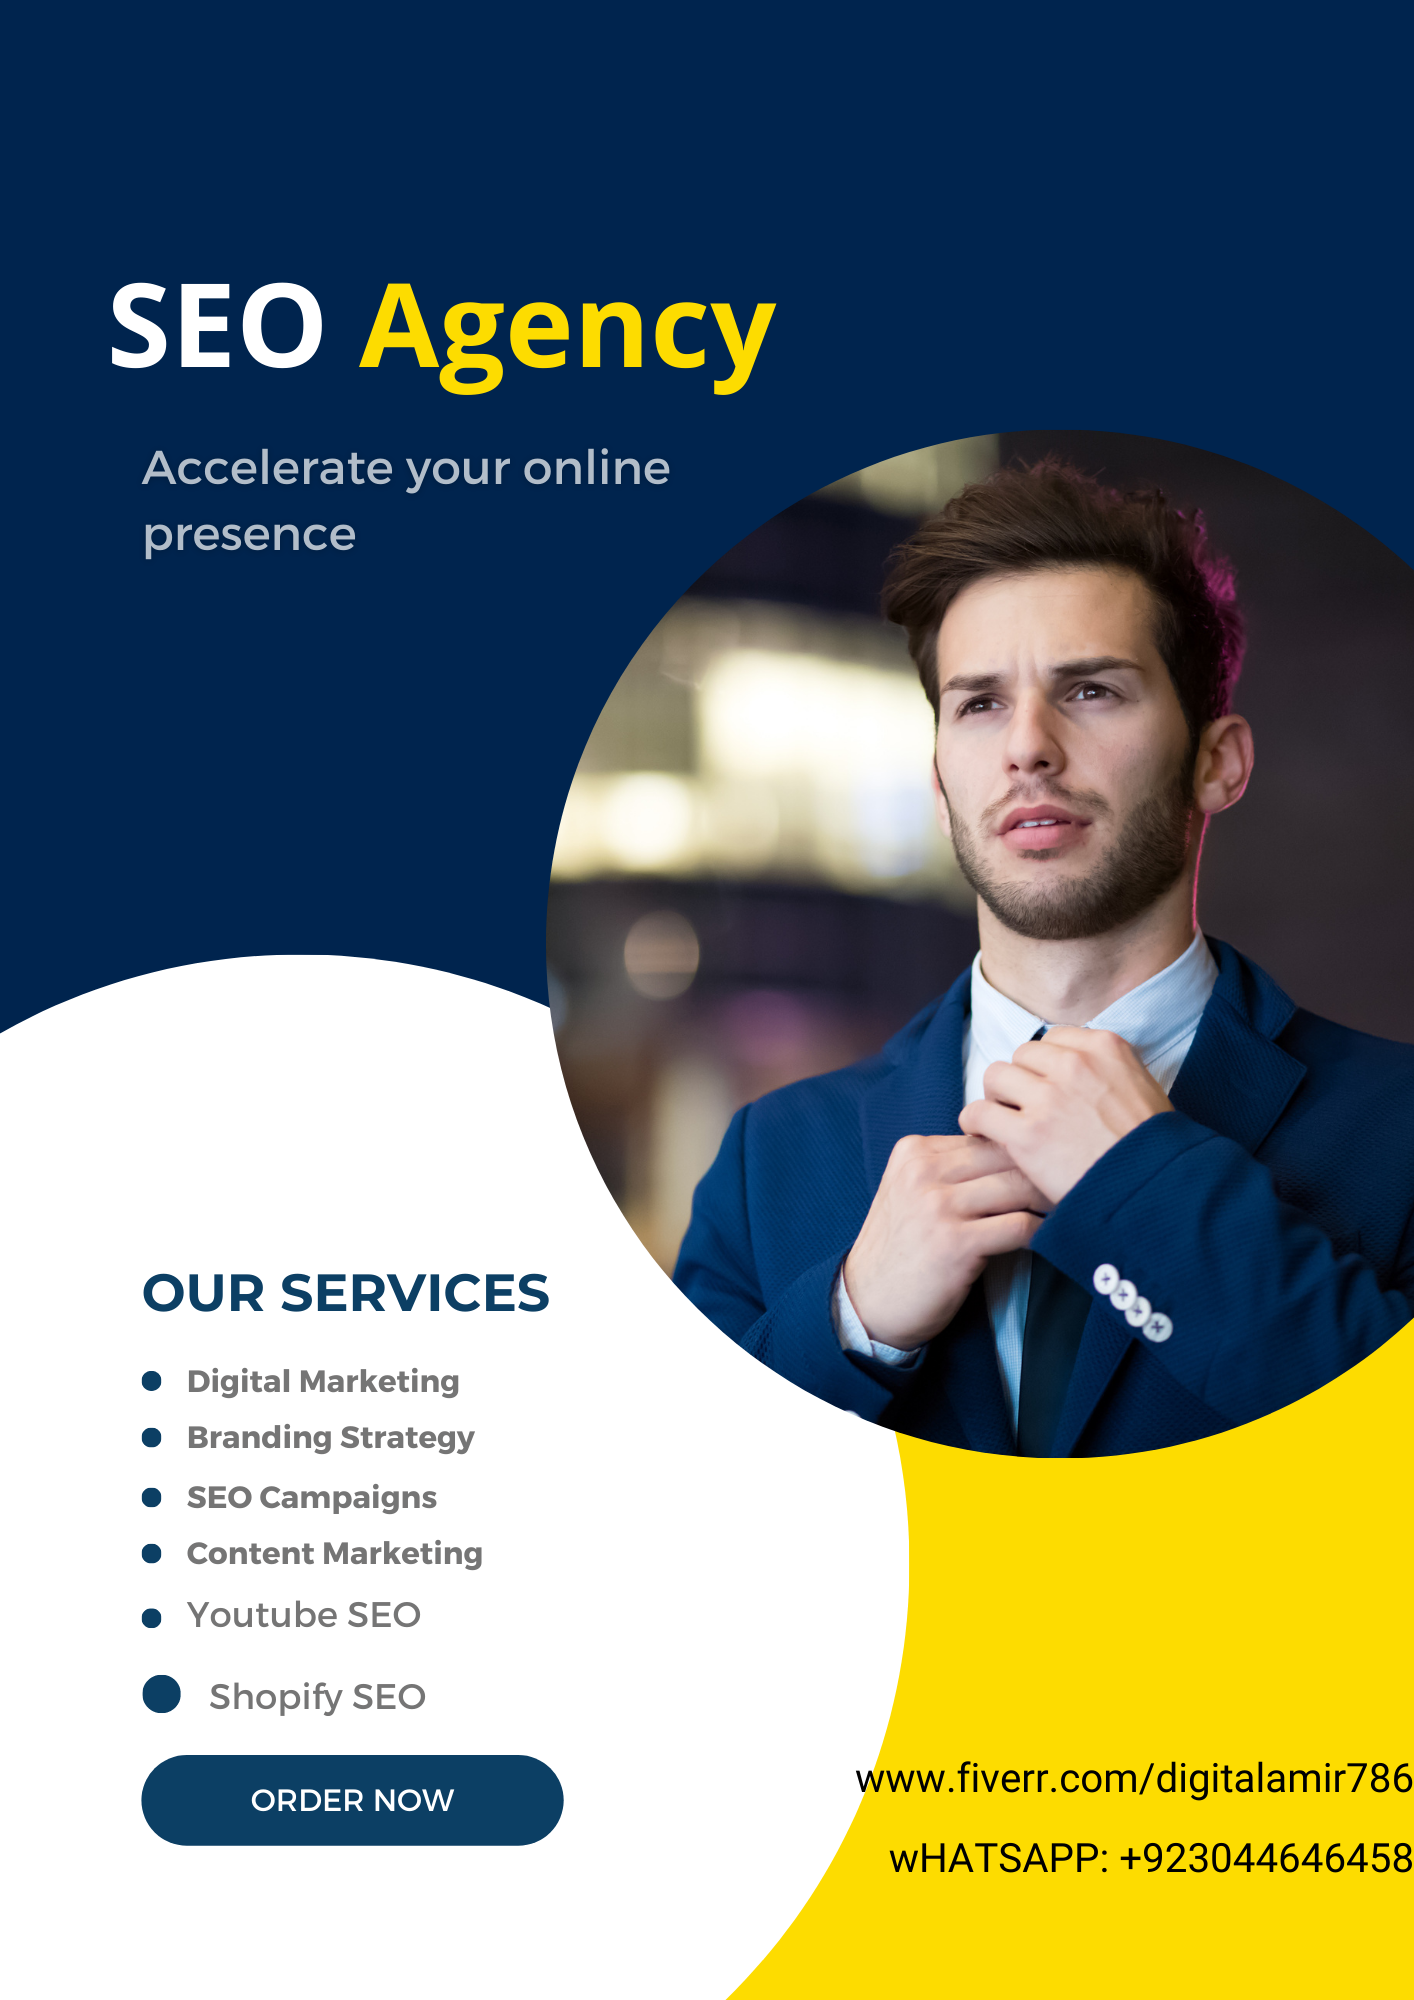 Monthly seo service